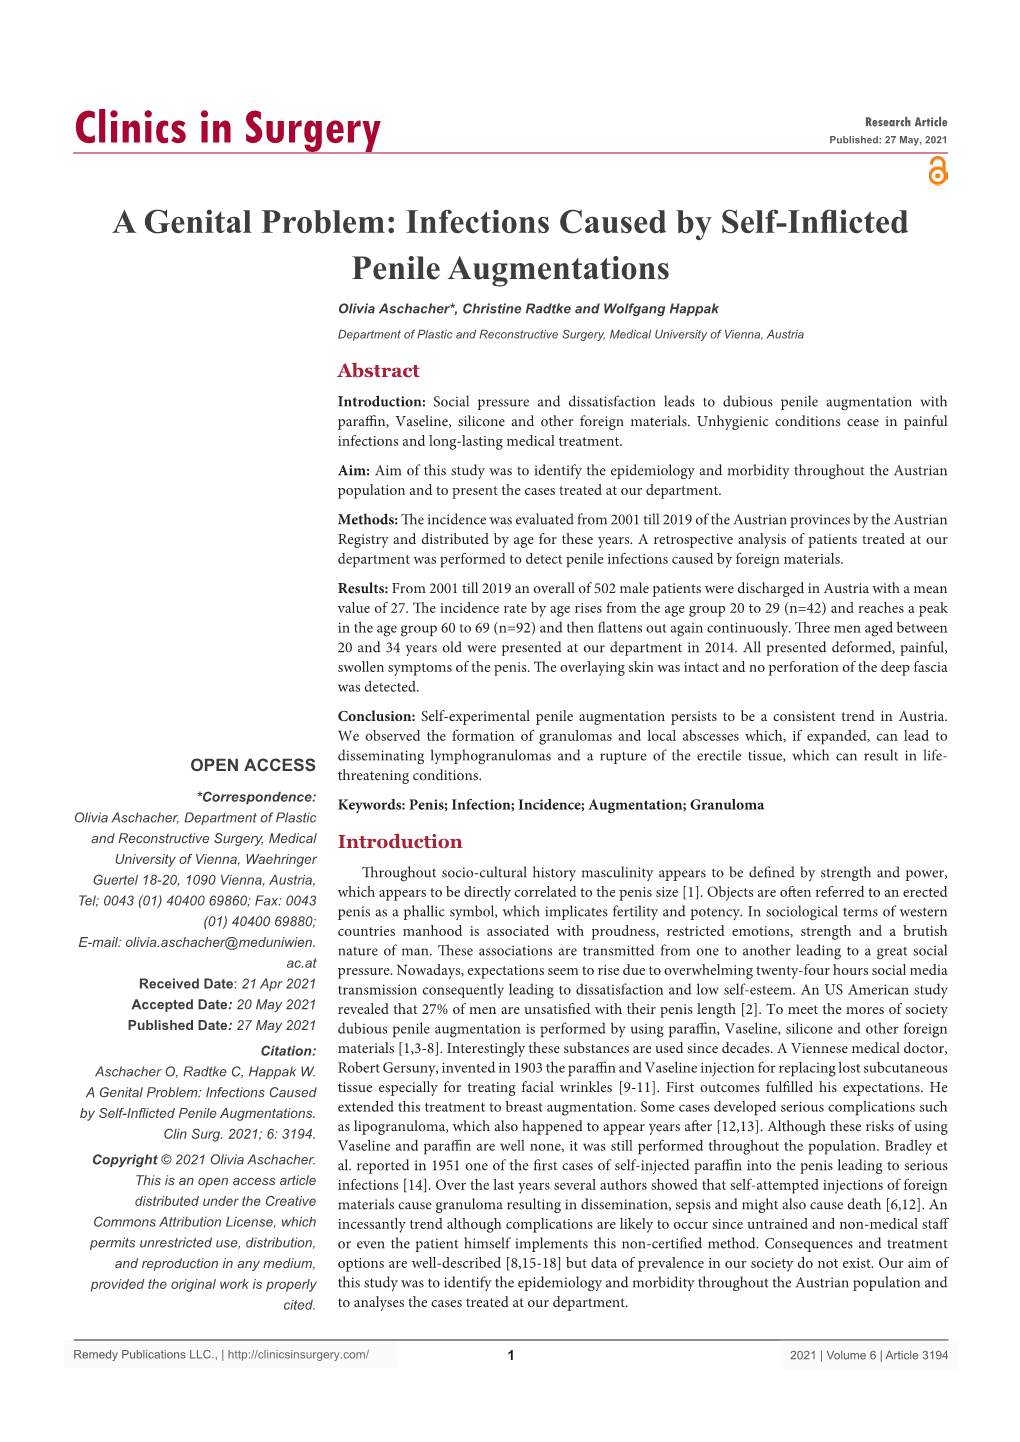 A Genital Problem: Infections Caused by Self-Inflicted Penile Augmentations